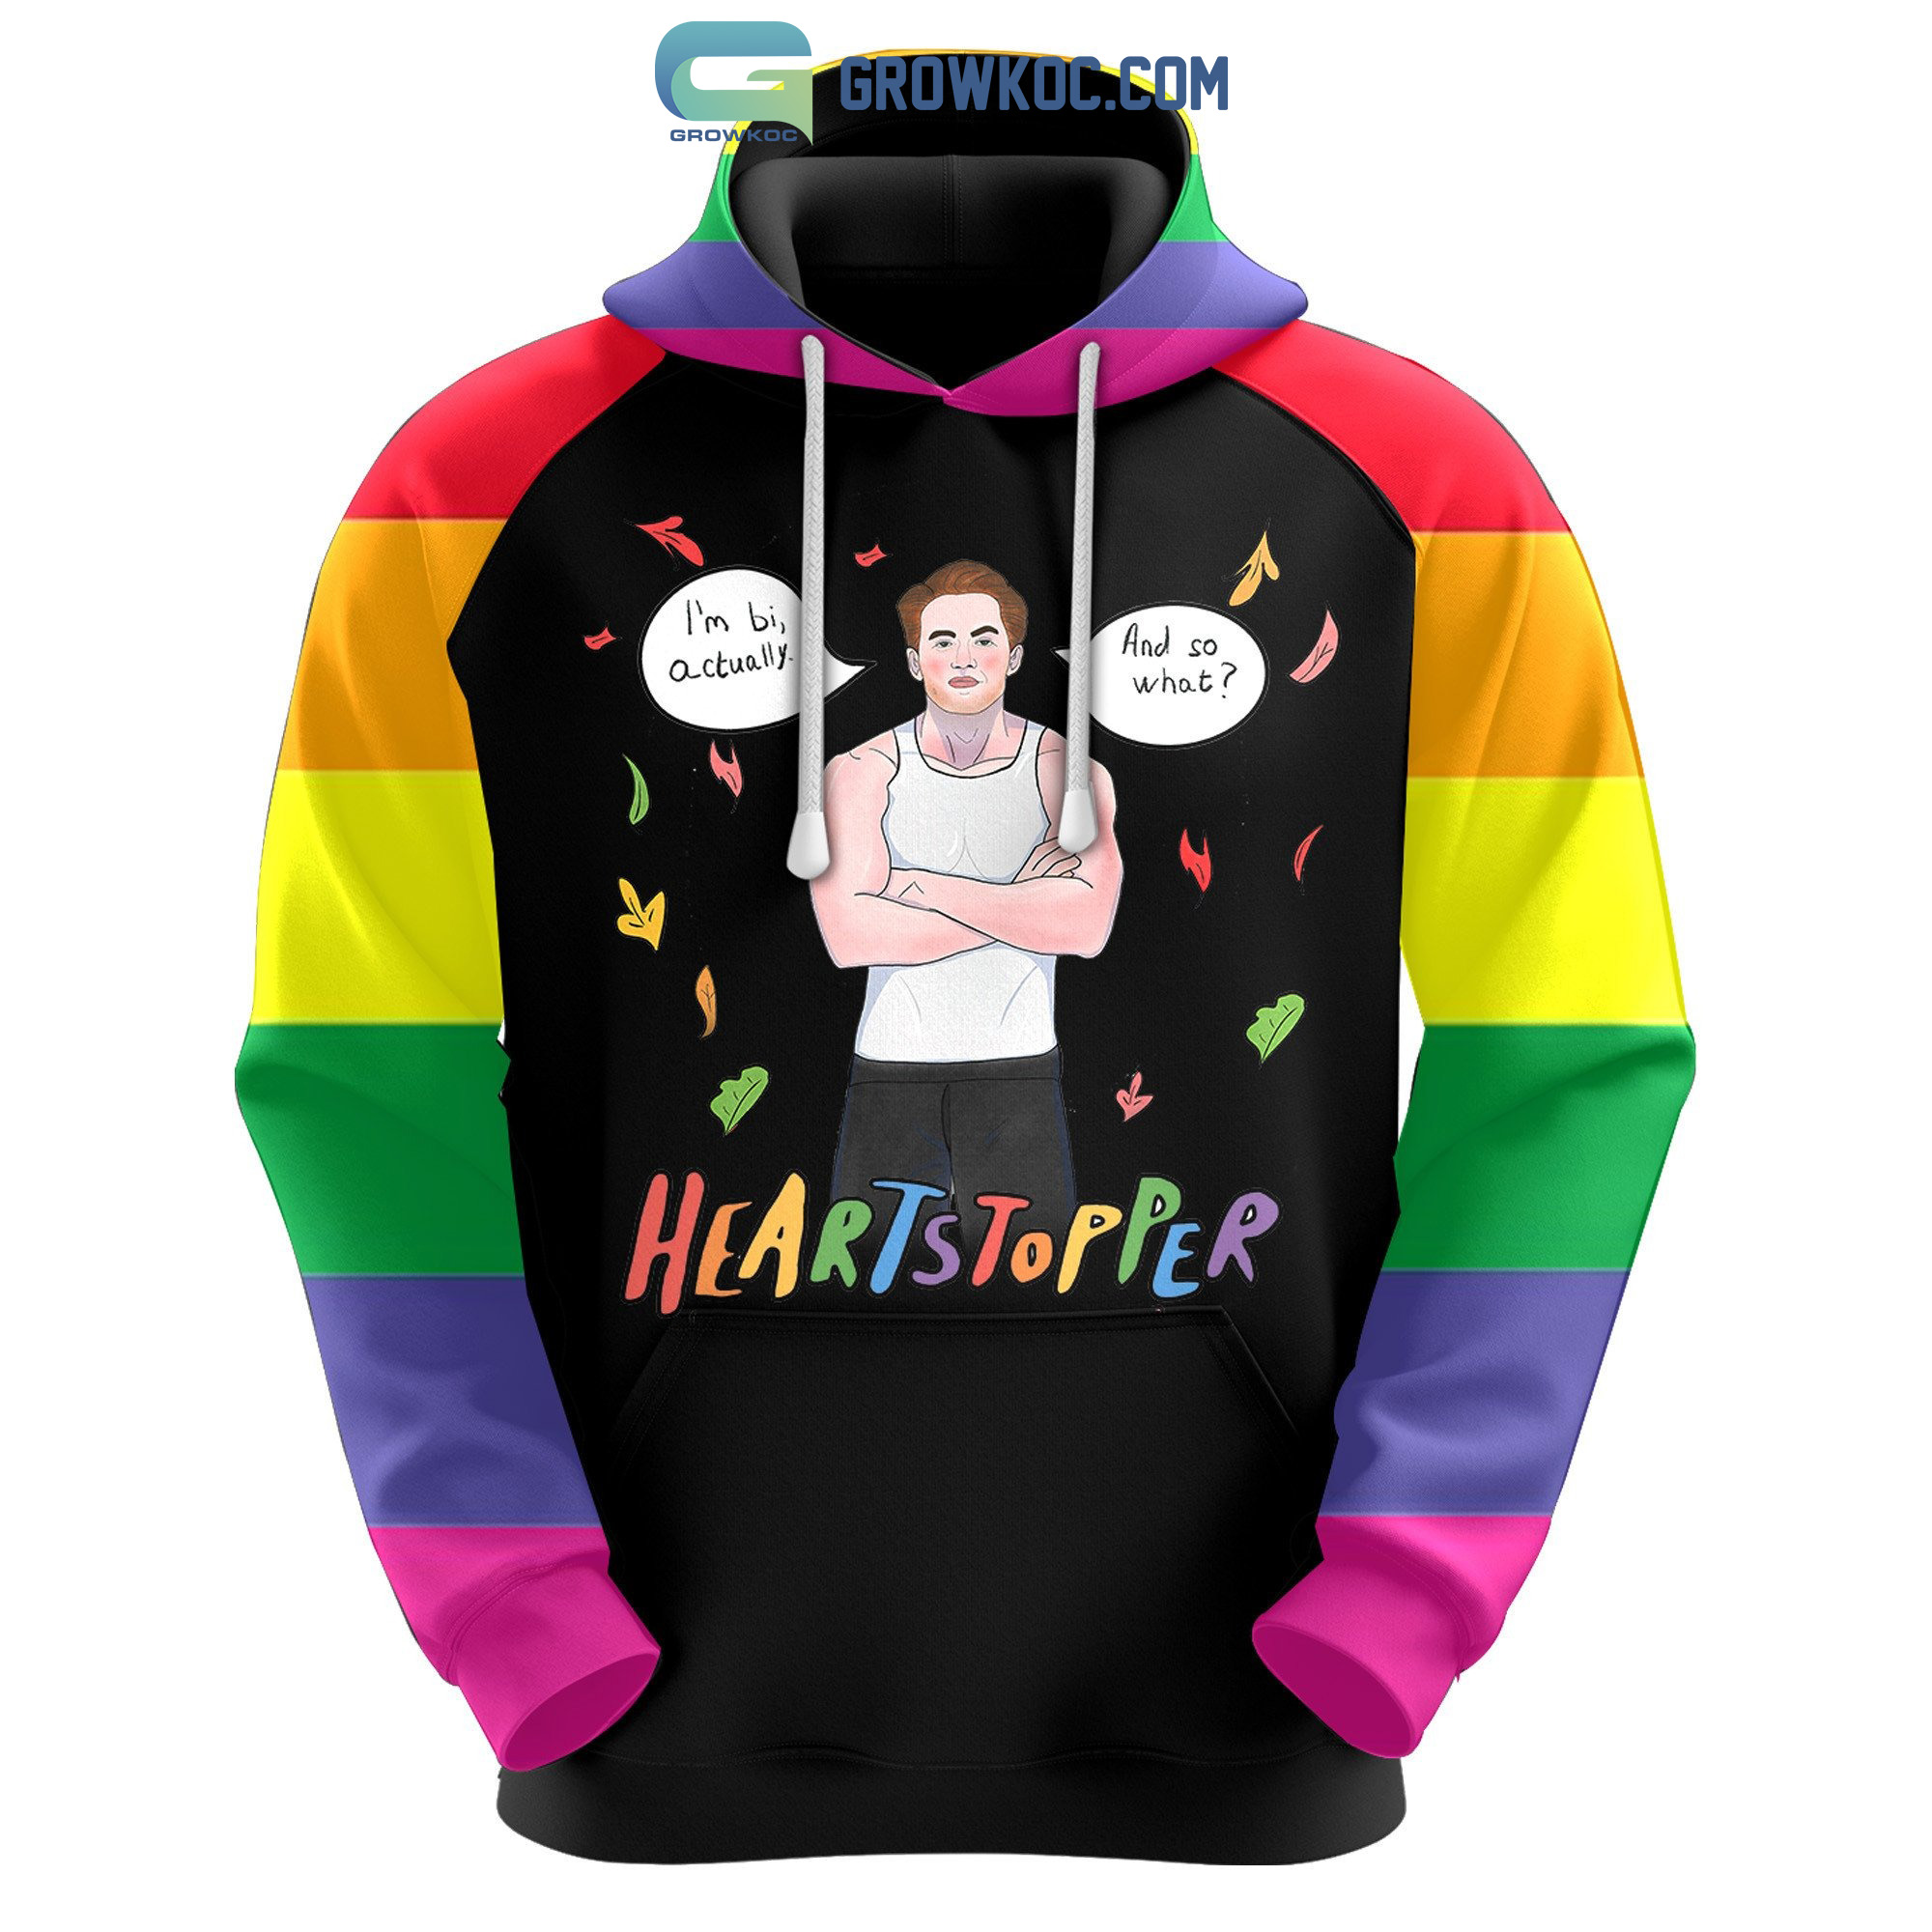 Nick Nelson Heartstopper I'm Bi Actually And So What Hoodie Leggings Set